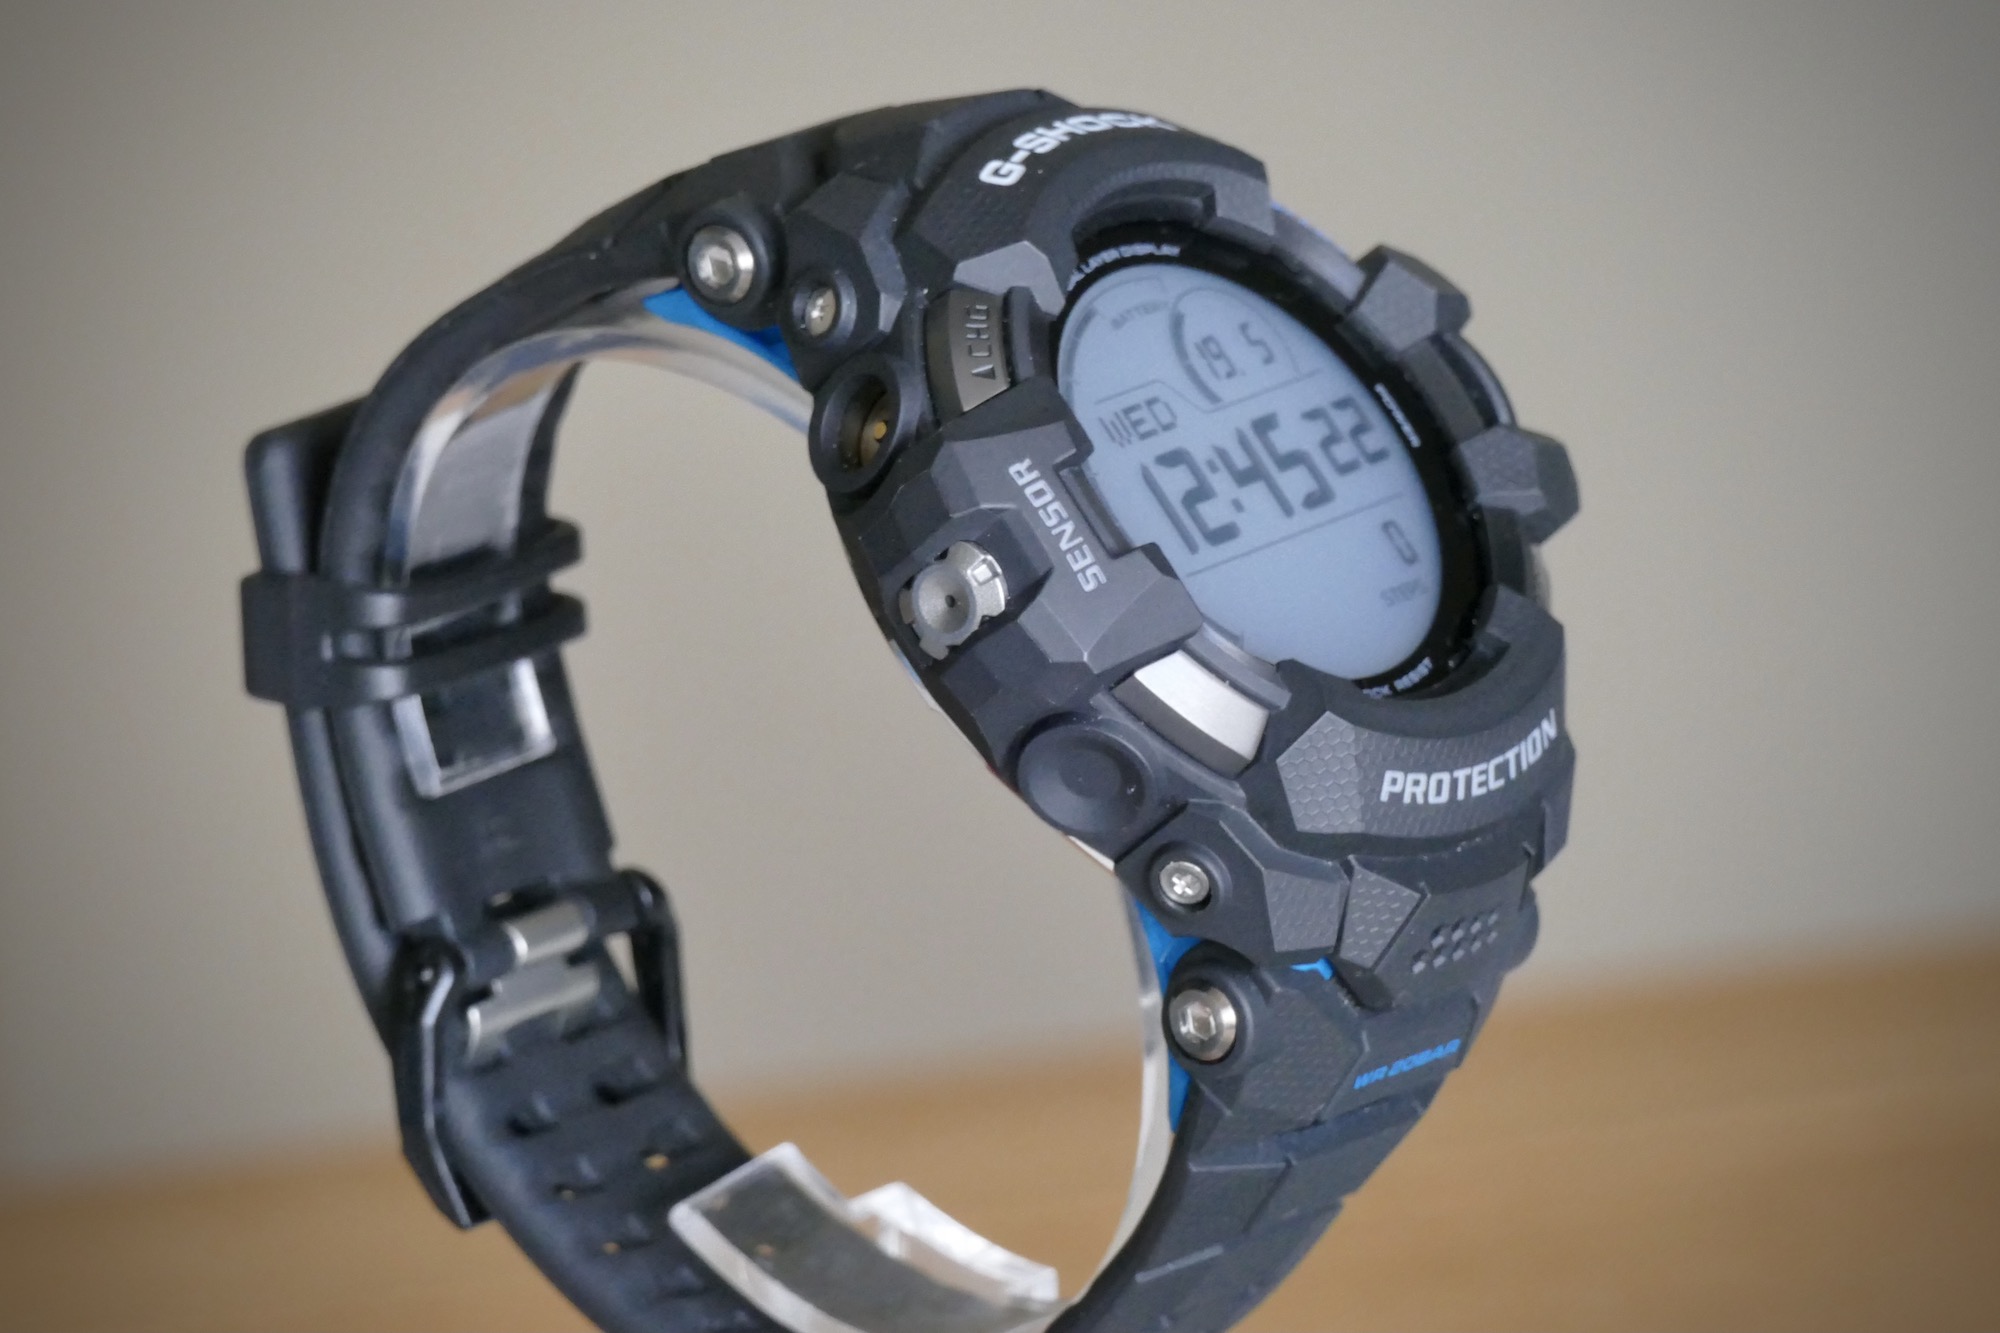 G-Shock GSW-H1000 Review: The G-Shock Collector's Choice